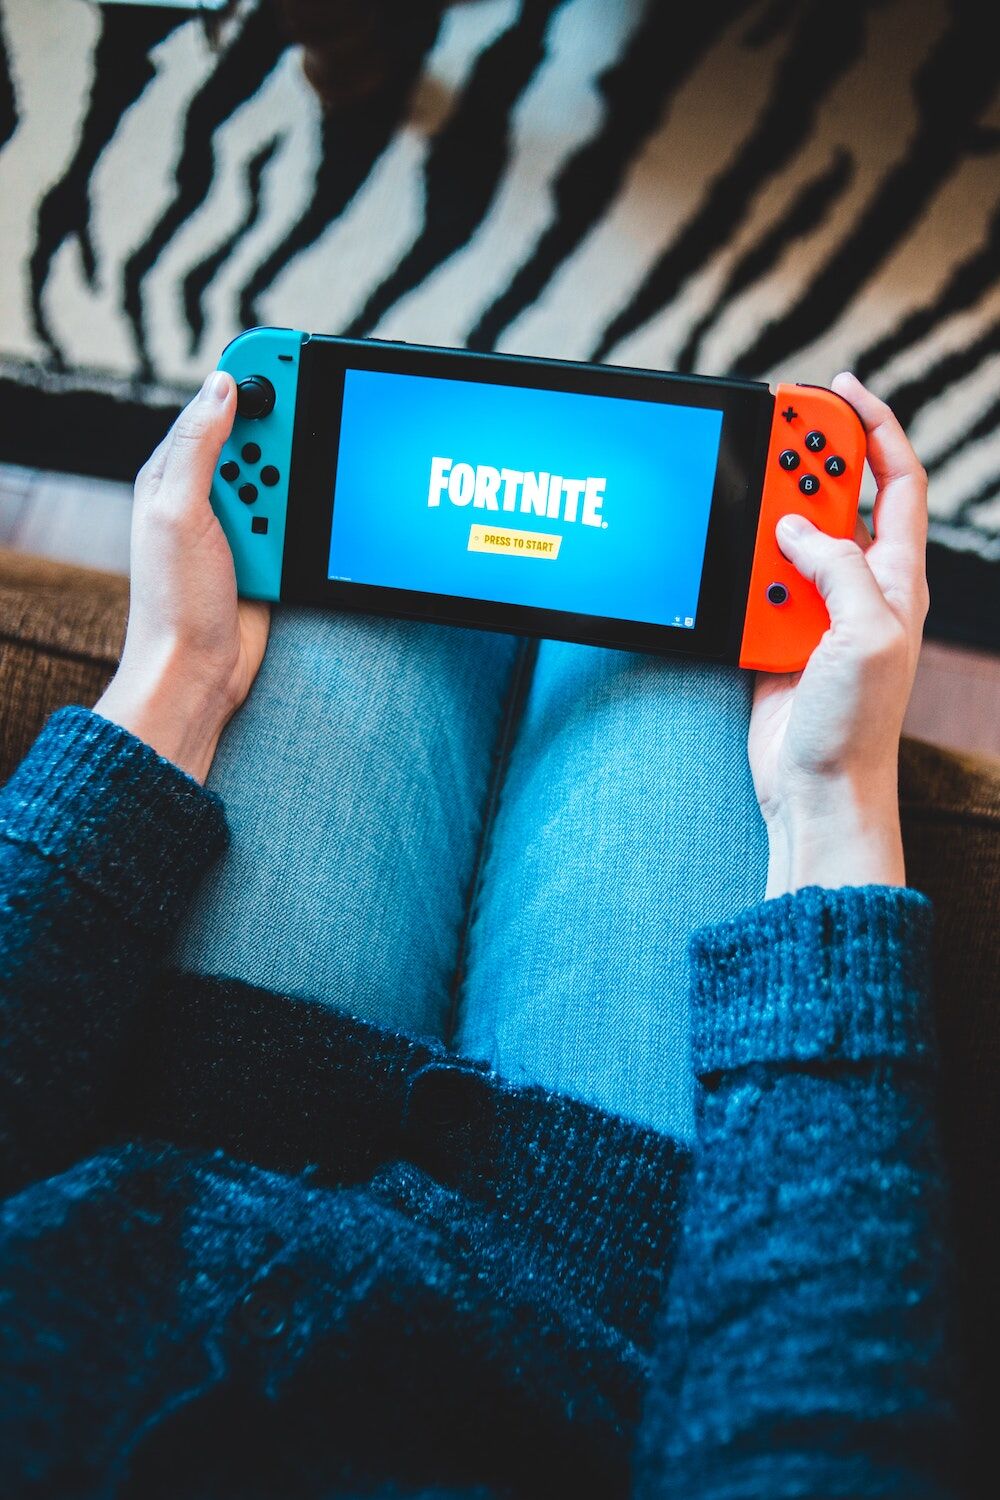 Why Fortnite Isn't On Microsoft's Xbox Cloud Gaming Service - TechStory